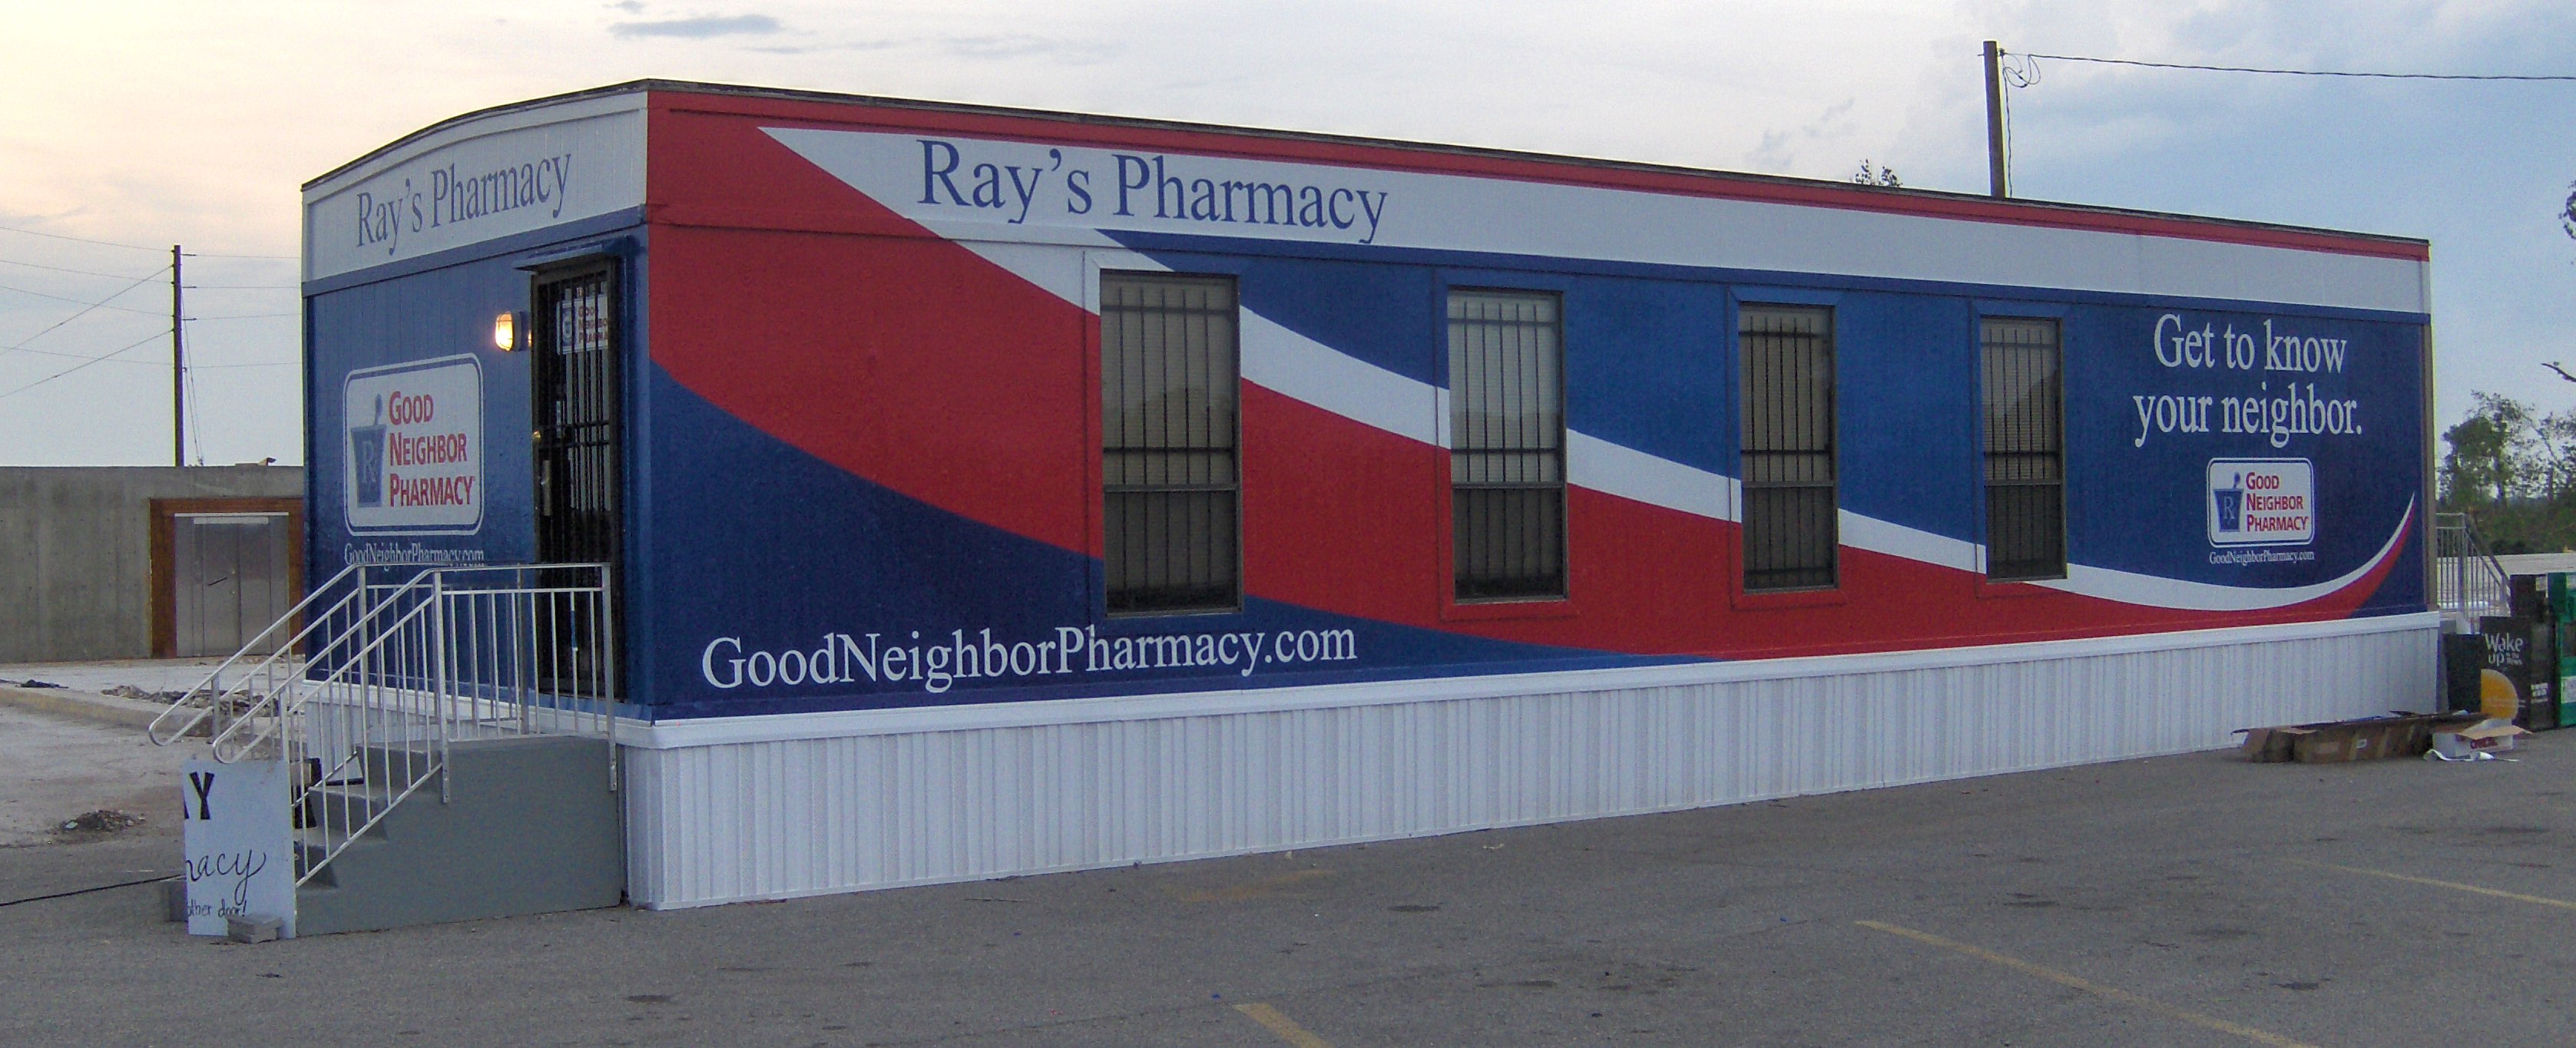 FEMA Trailer Graphics: Pharmacy for Disaster Relief